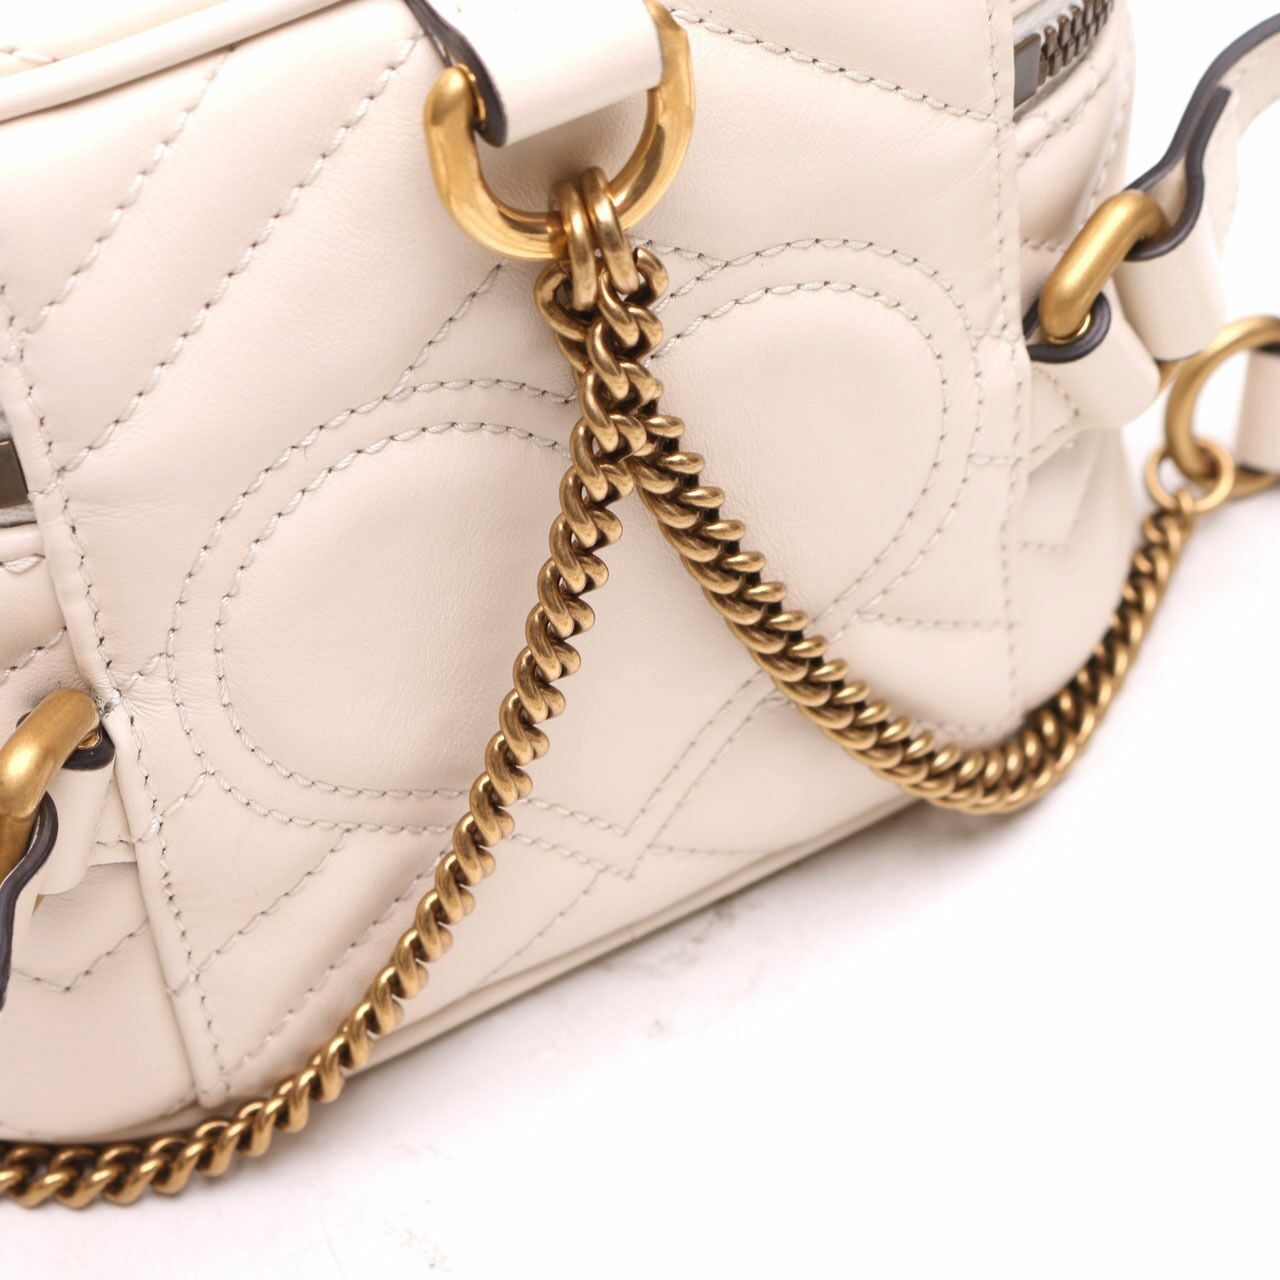 Gucci Marmont Matelasse Mini GG Round Off-white Leather Backpack